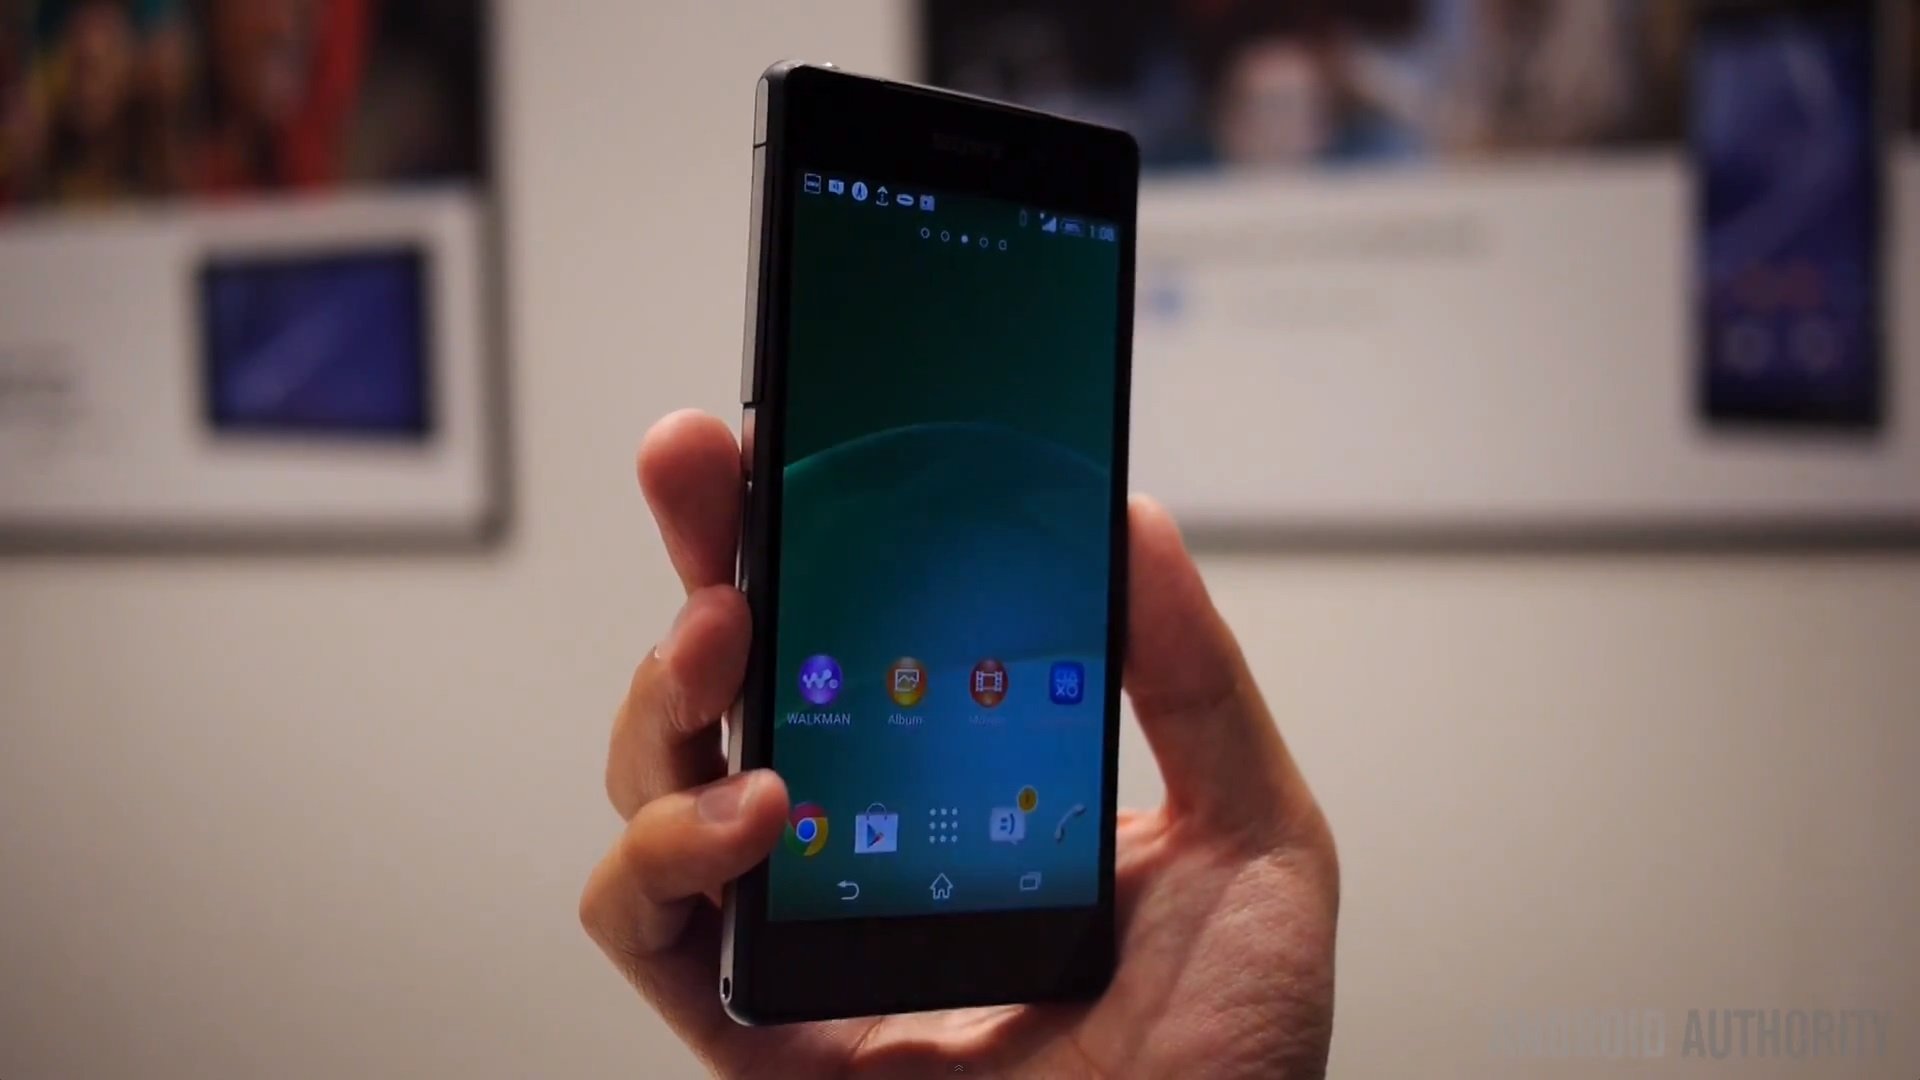 How to root the Sony Xperia Z2